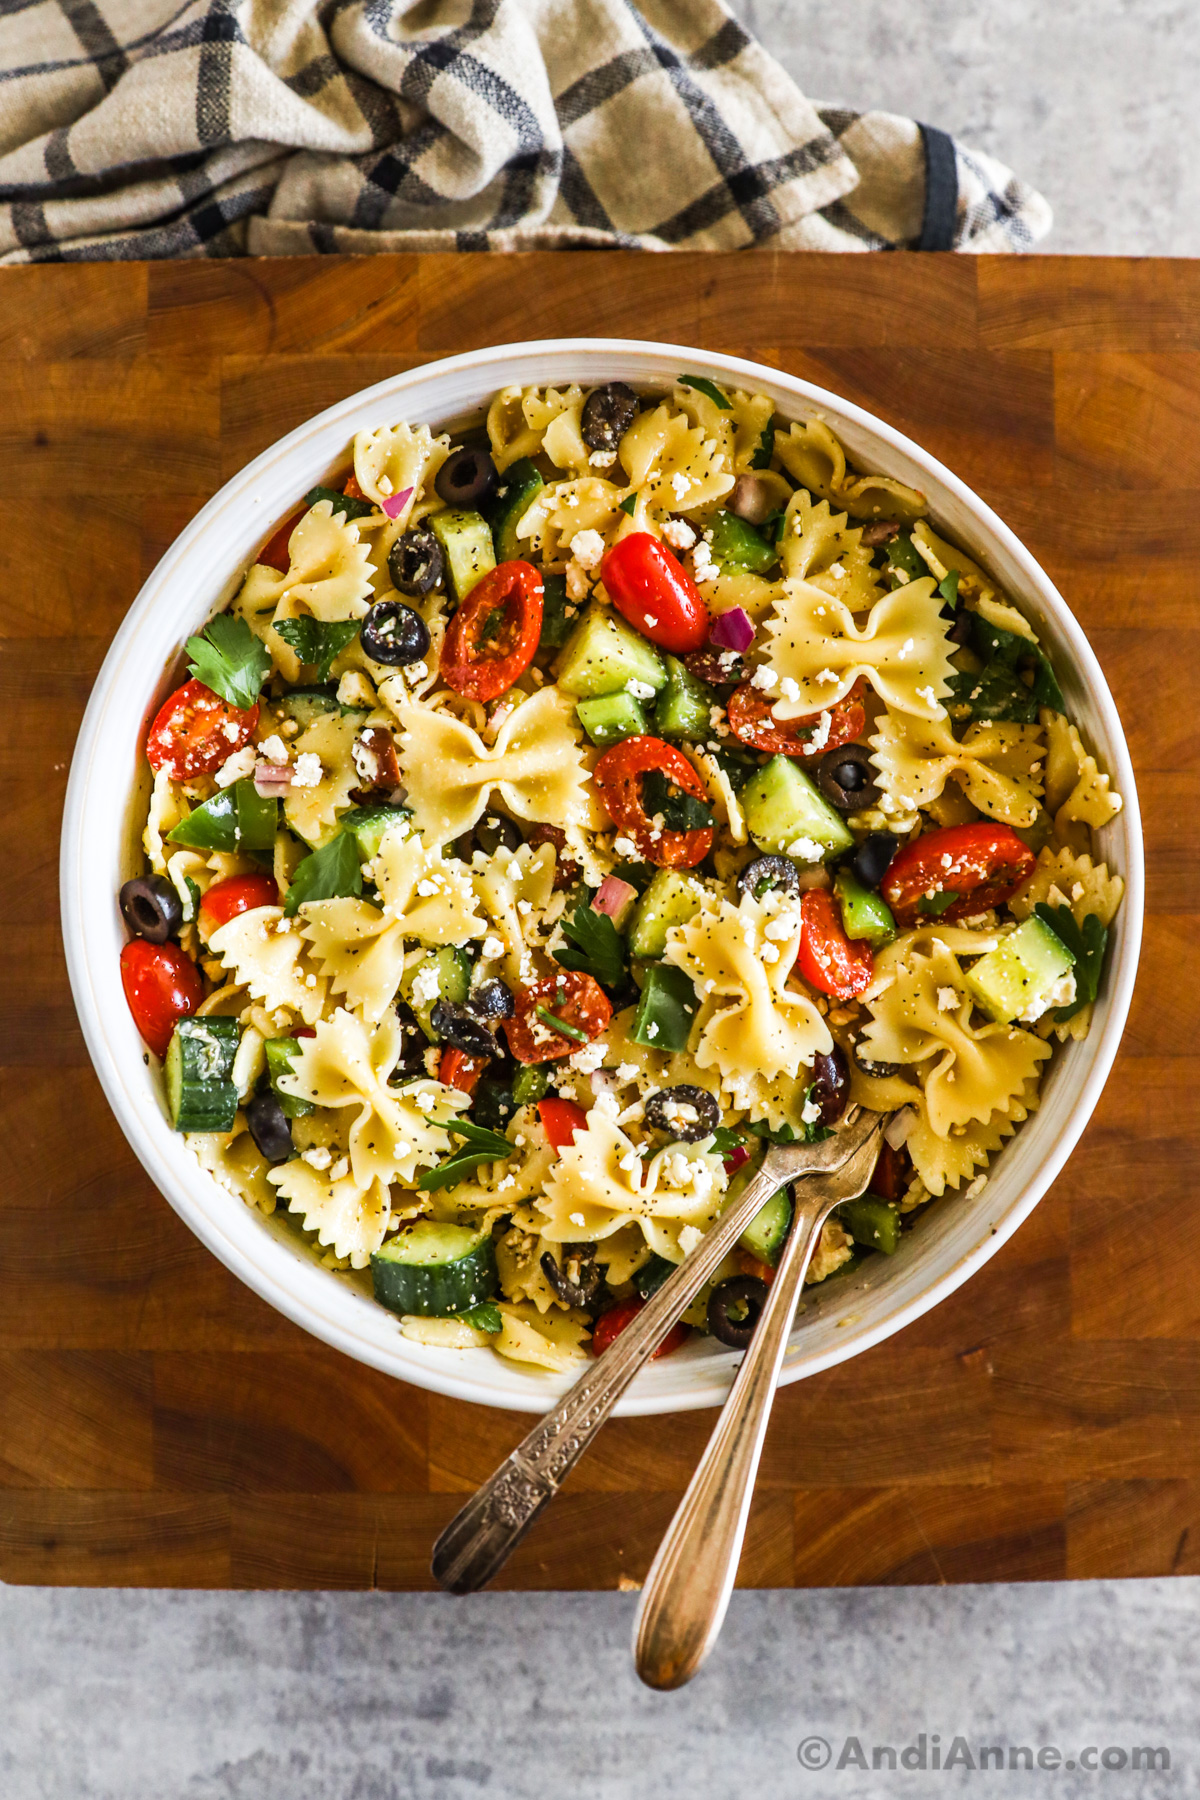 Looking down at a greek pasta salad with farfalle pasta, tomatoes, cucumber, olives and feta cheese.